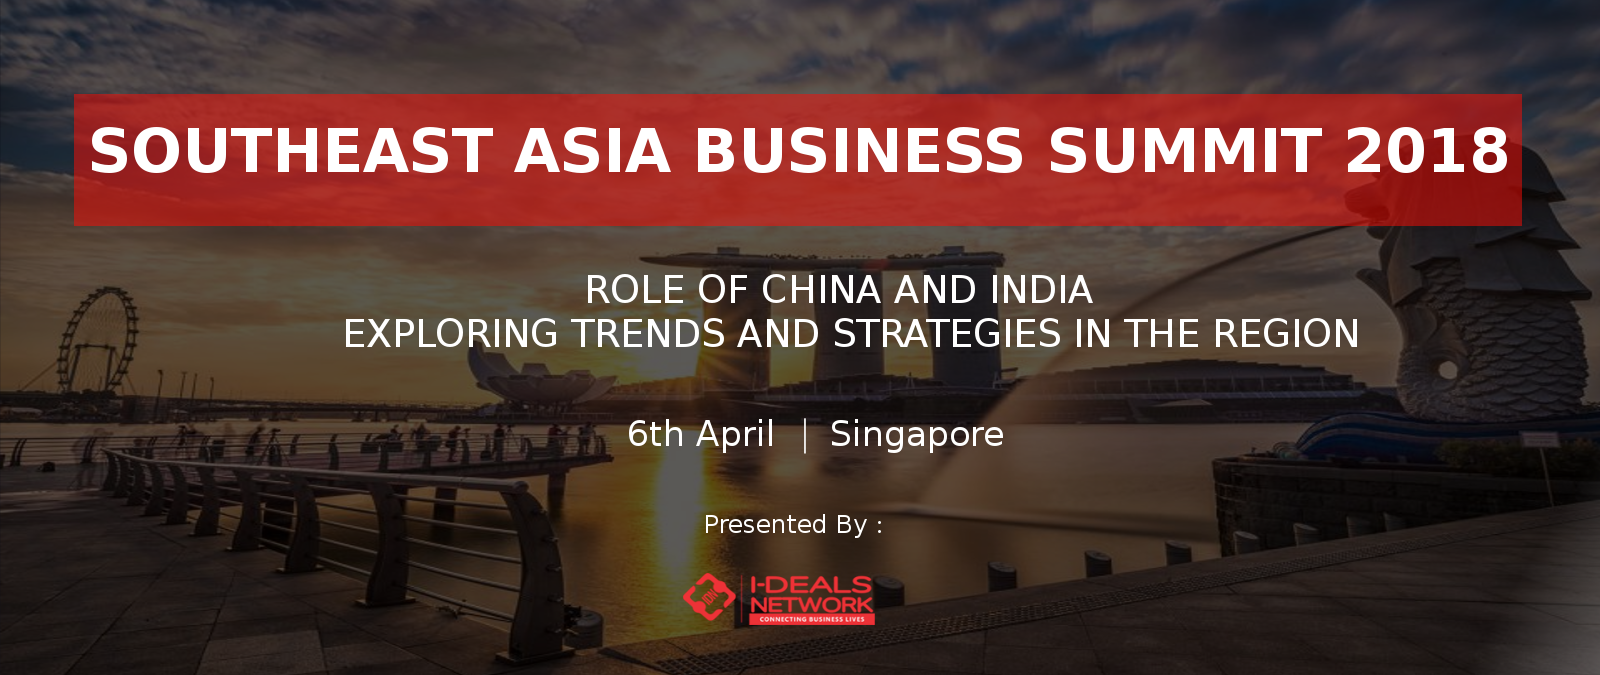 South East Asia Business Summit 2018 6 April